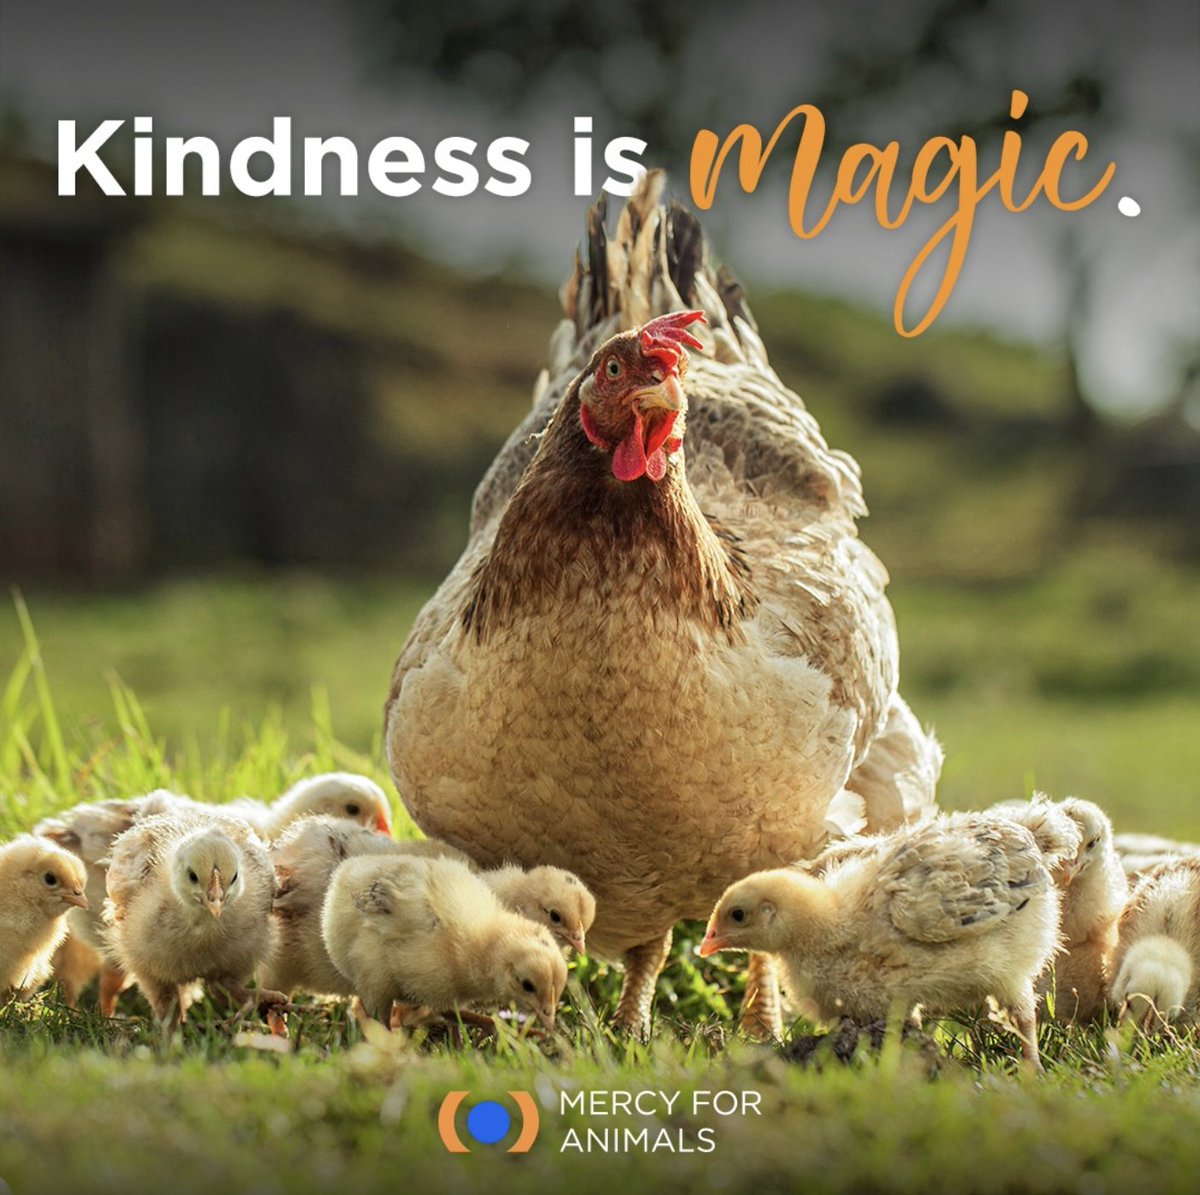 Today is International Respect for Chickens Day! What's your favorite thing about these amazing animals? 🐔 #InternationalRespectForChickensDay